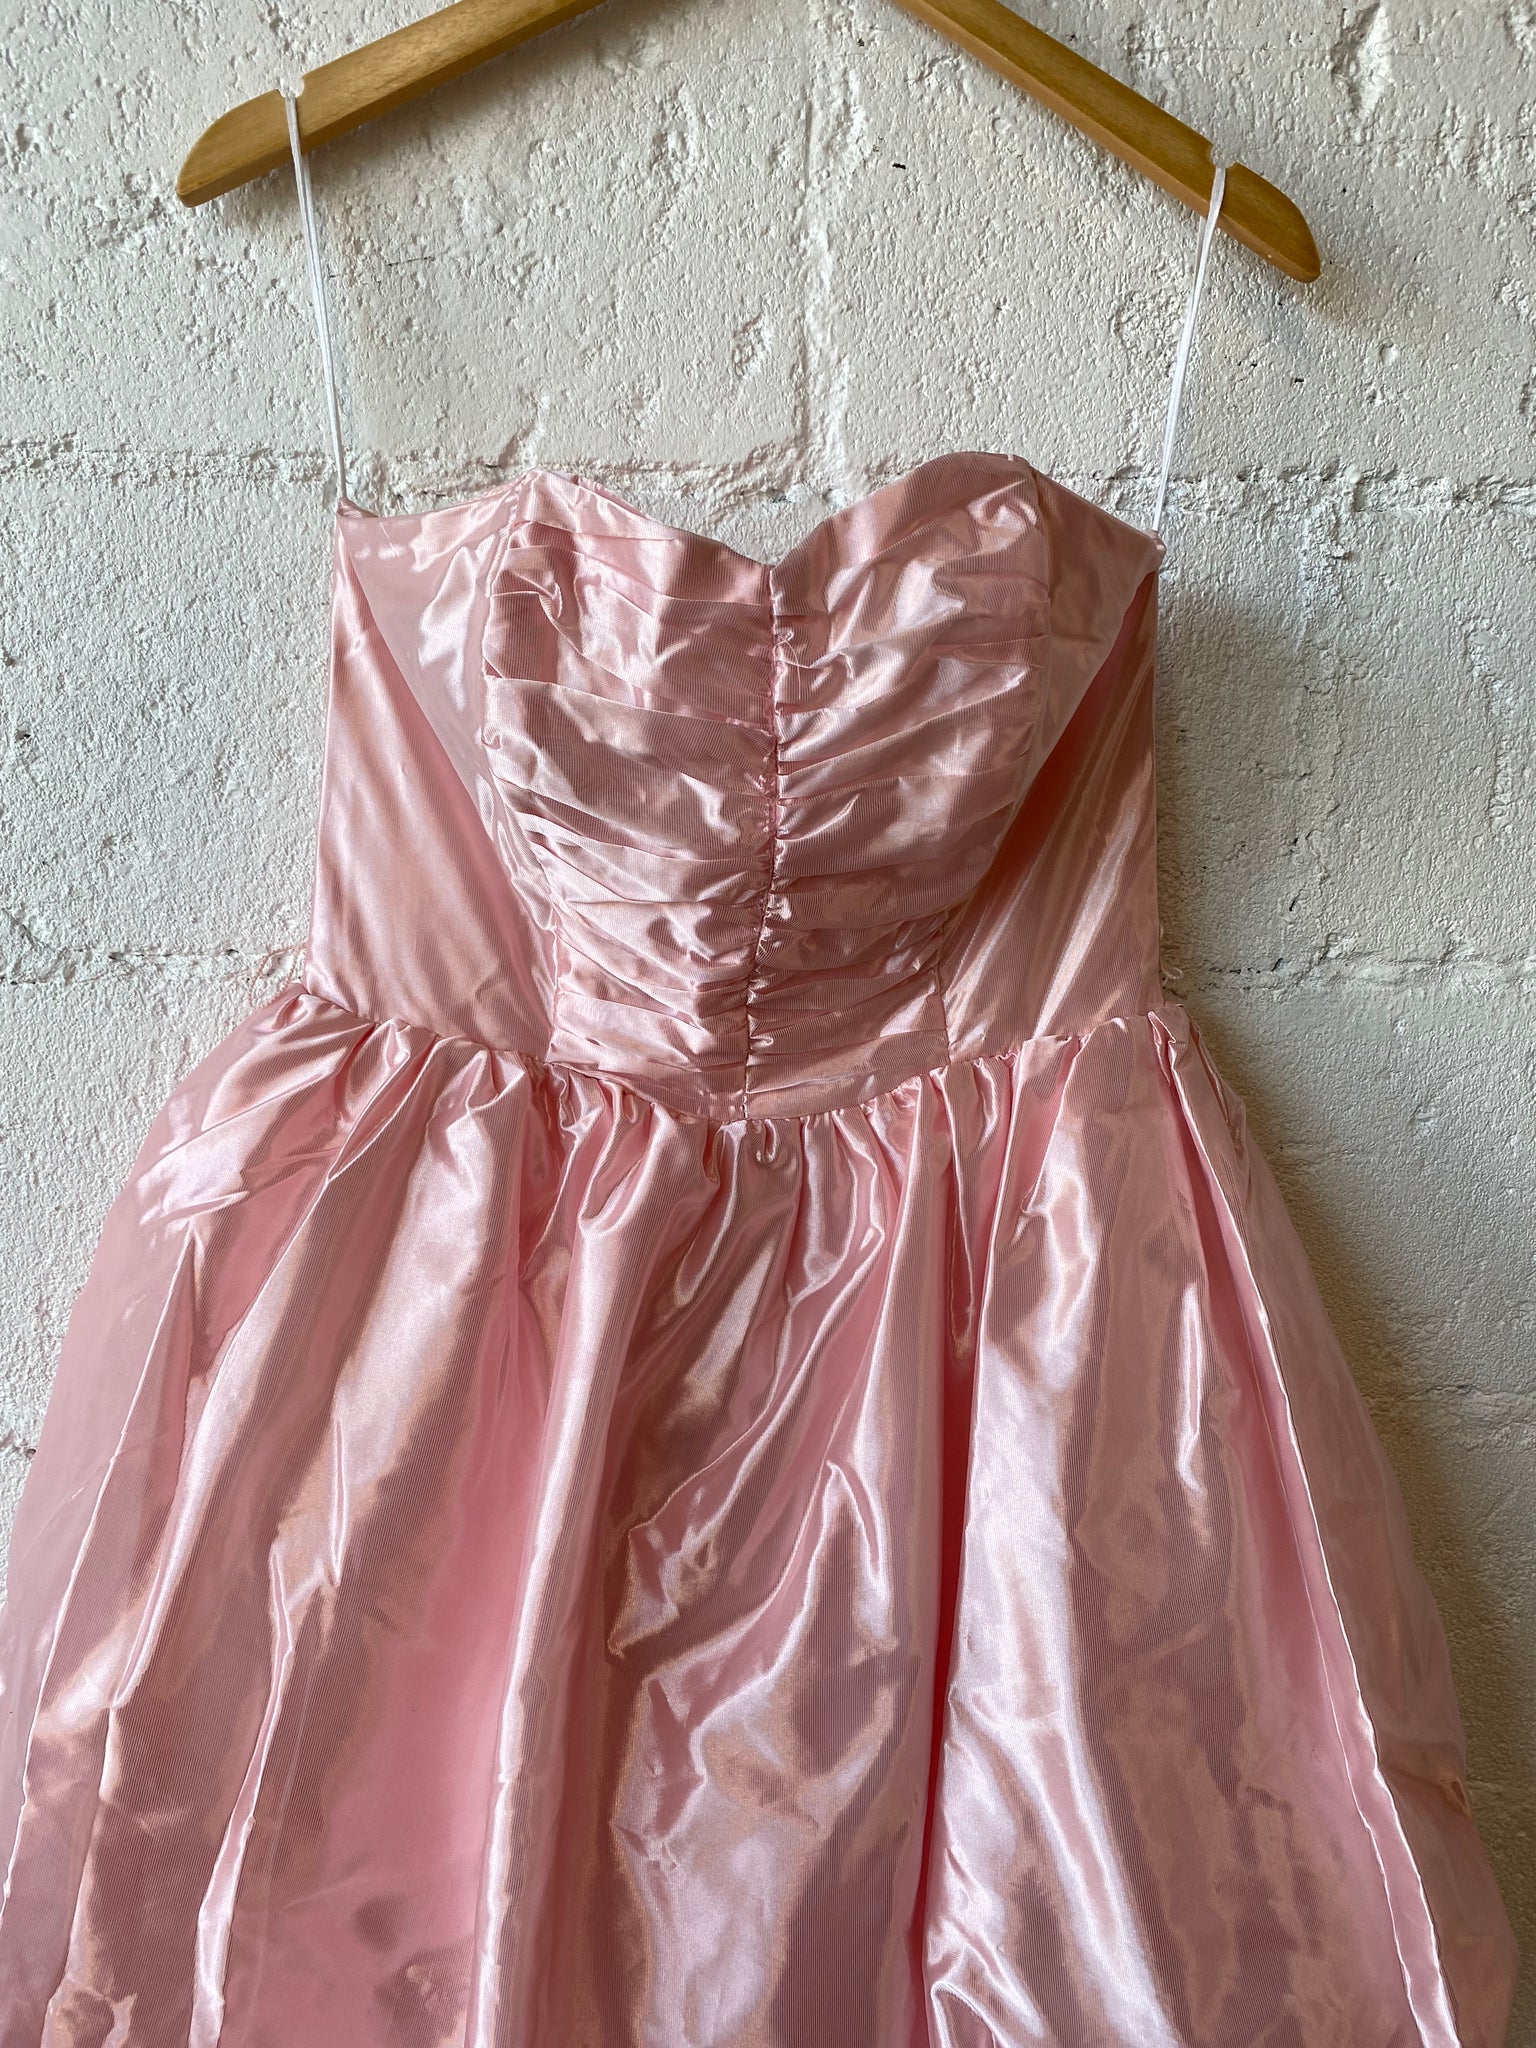 Vintage Pink Strapless Steppin' Out Dress